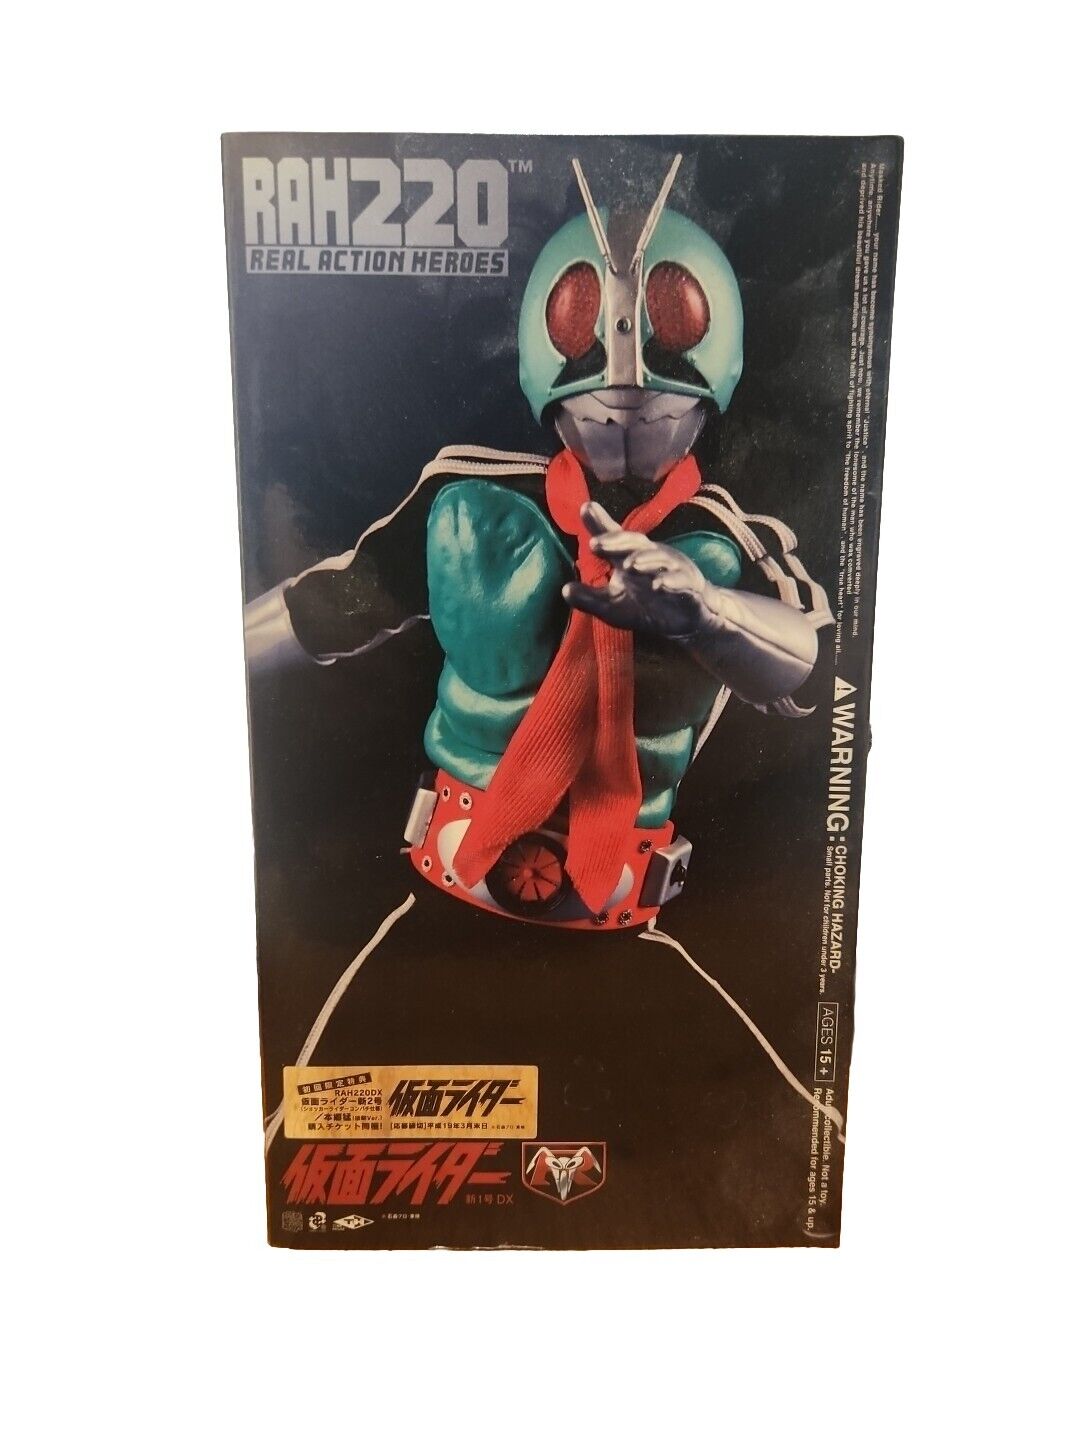 Kamen Rider Toy RAH220 real action heroes New No. 1 DX No.2 1/6 Scale 12 Inch